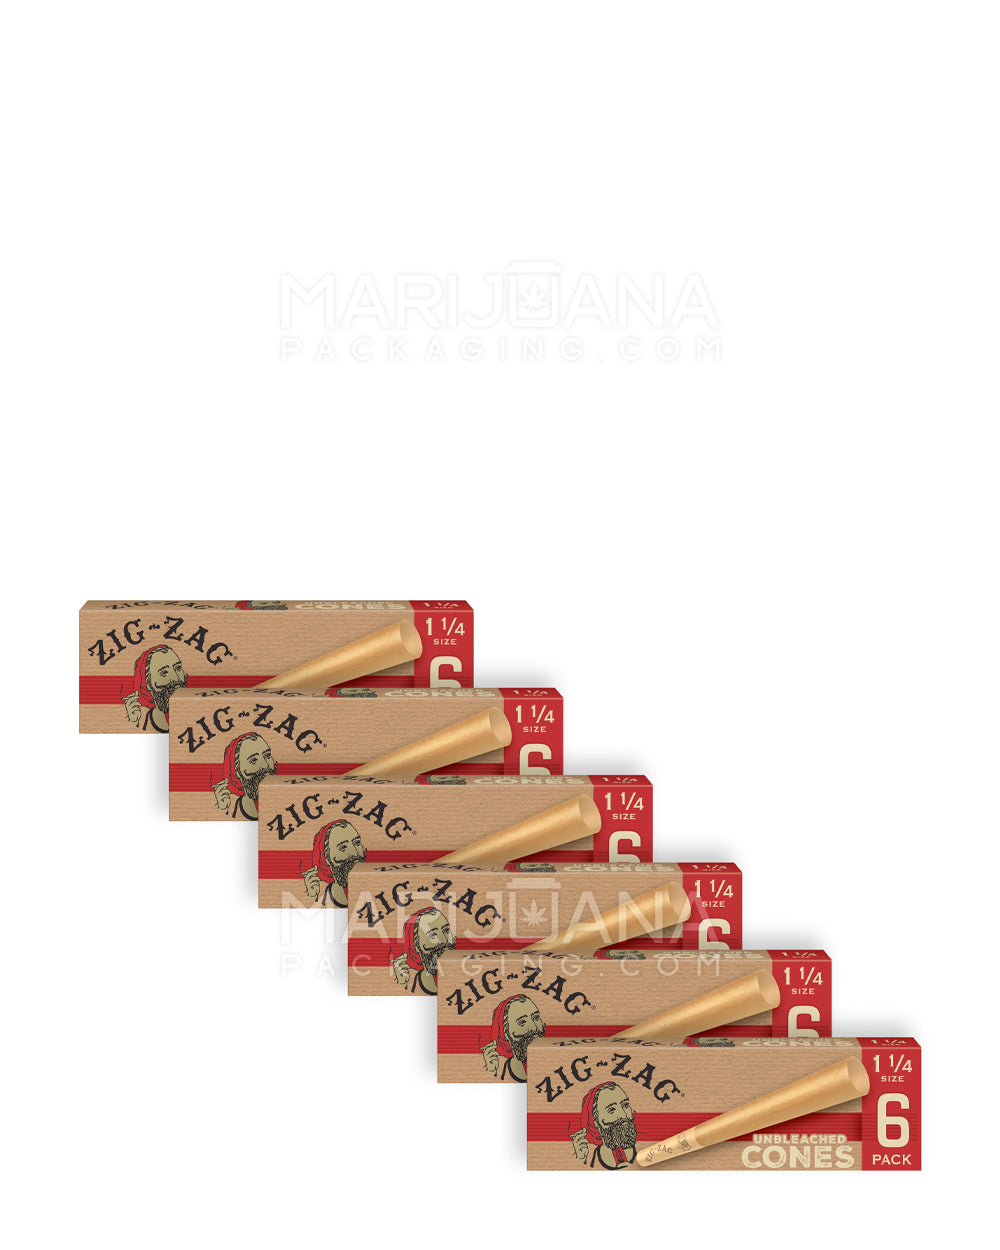 Zig-Zag Unbleached Paper Cones - Pack of 100 (MSRP $50.00)